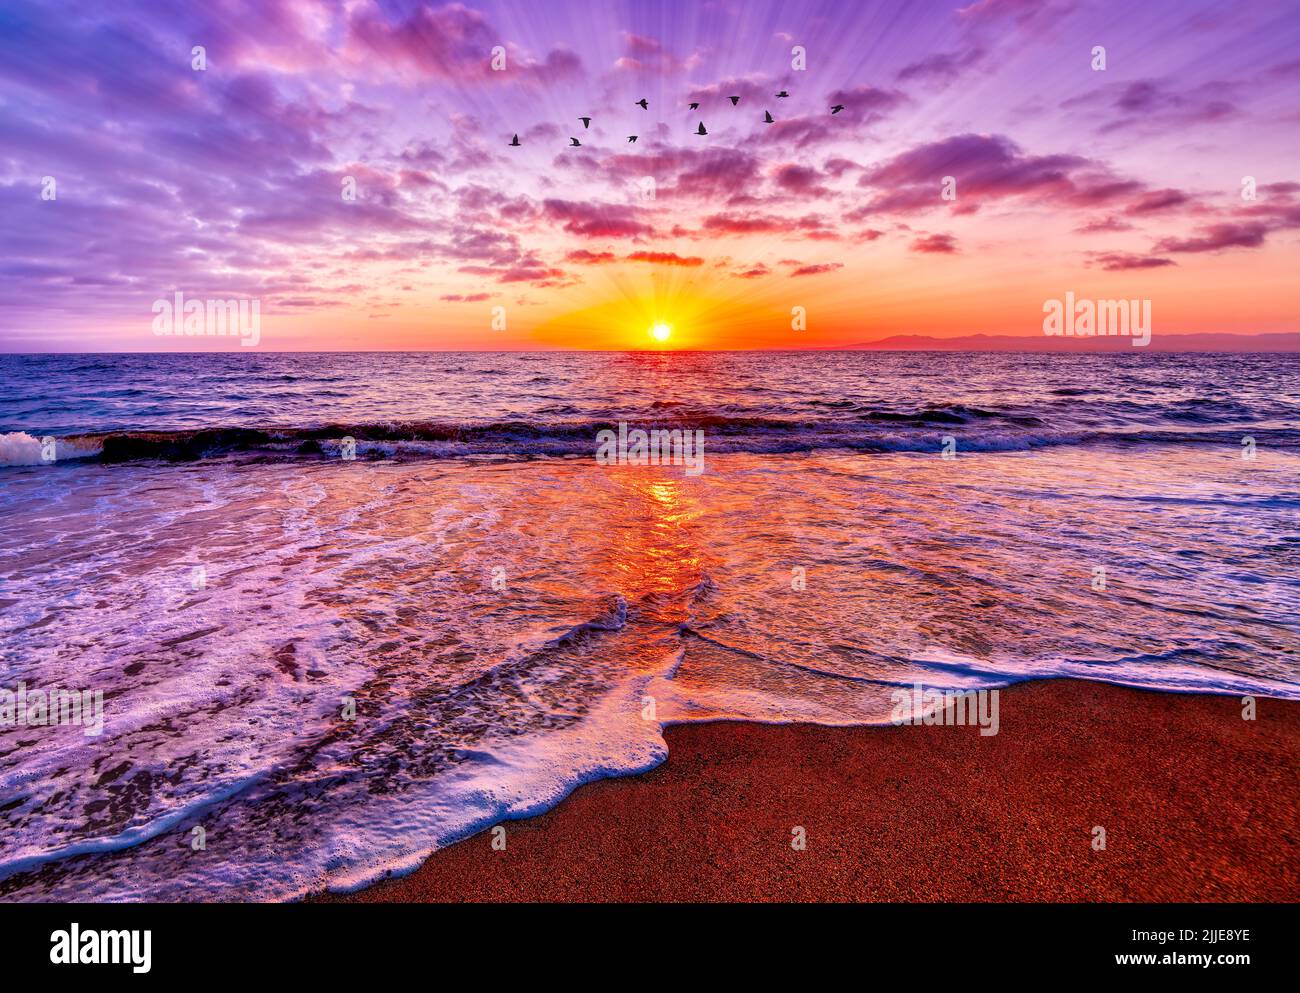 Sun Rays Are Bursting On The Ocean Horizon With Birds Flying Against A Vivid Colorful Sunset Sky Stock Photo